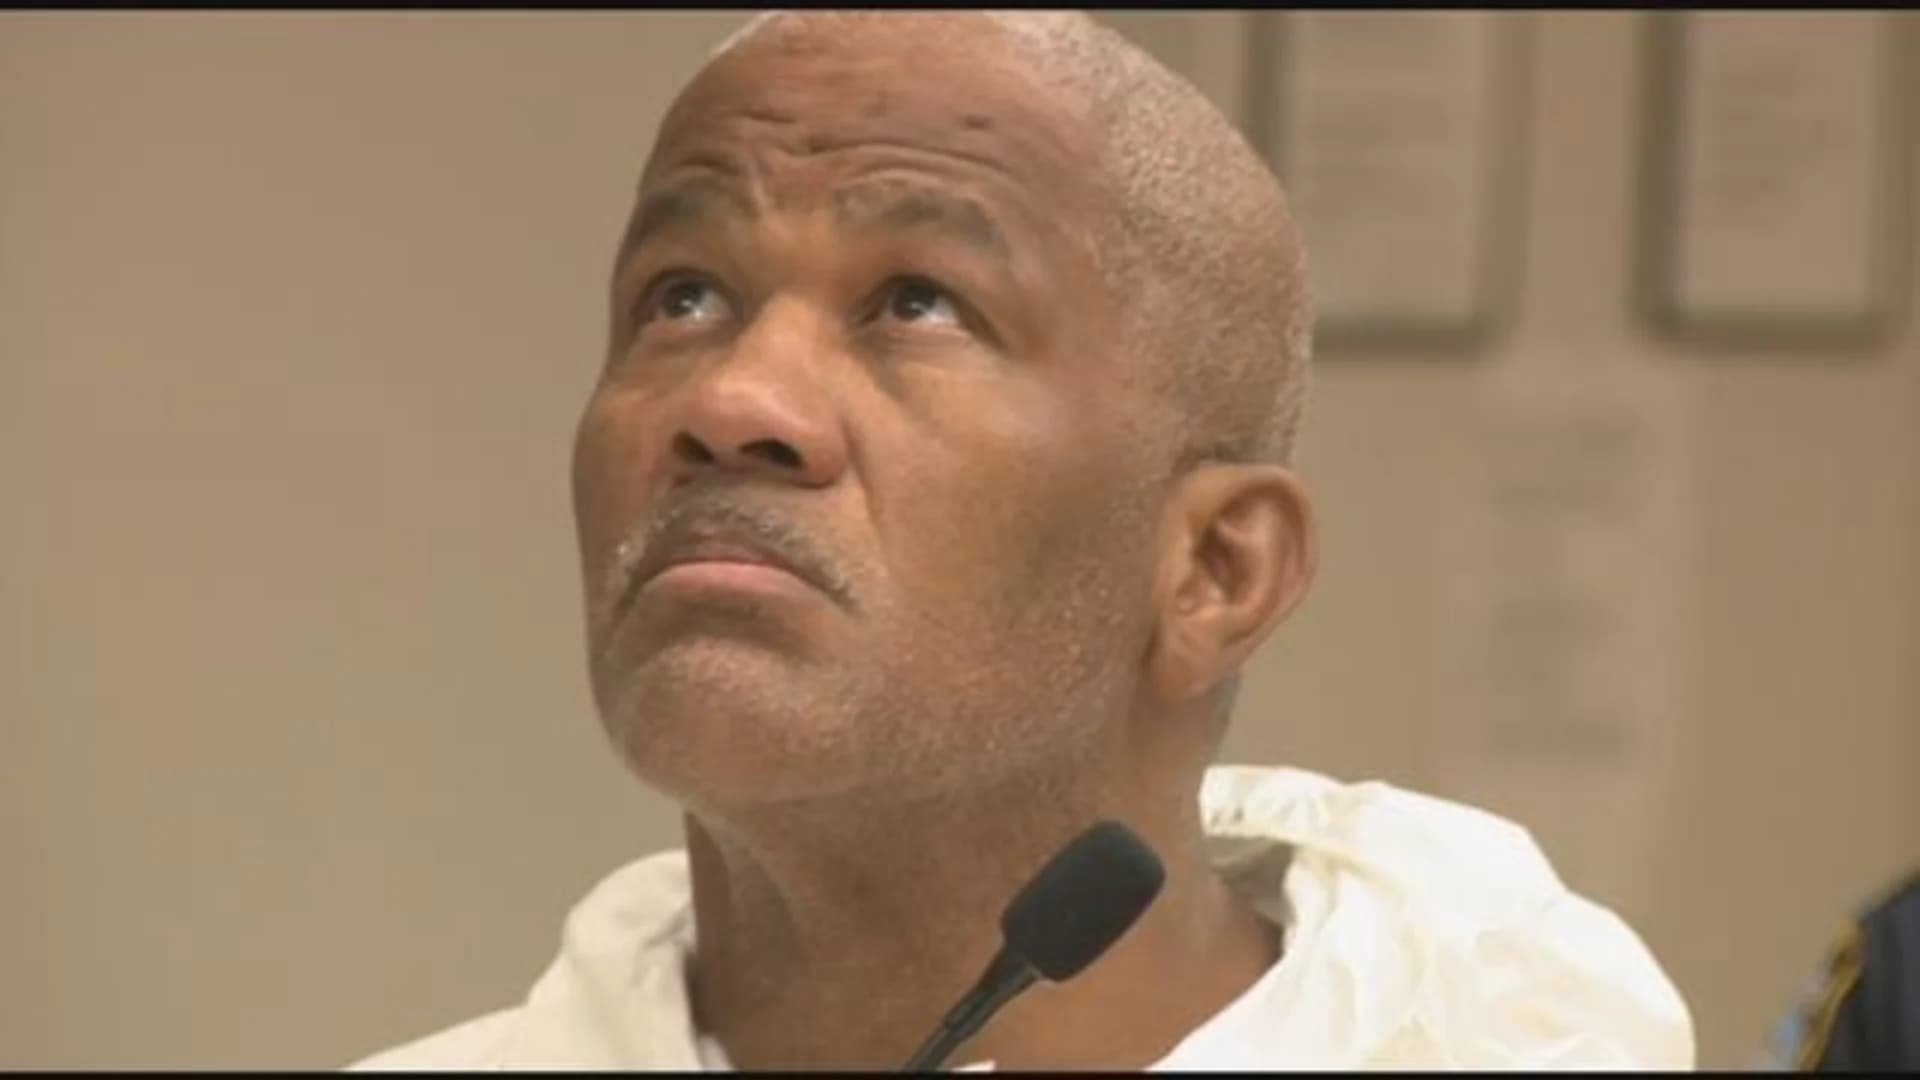 Man accused of fatally stabbing wife appears before judge